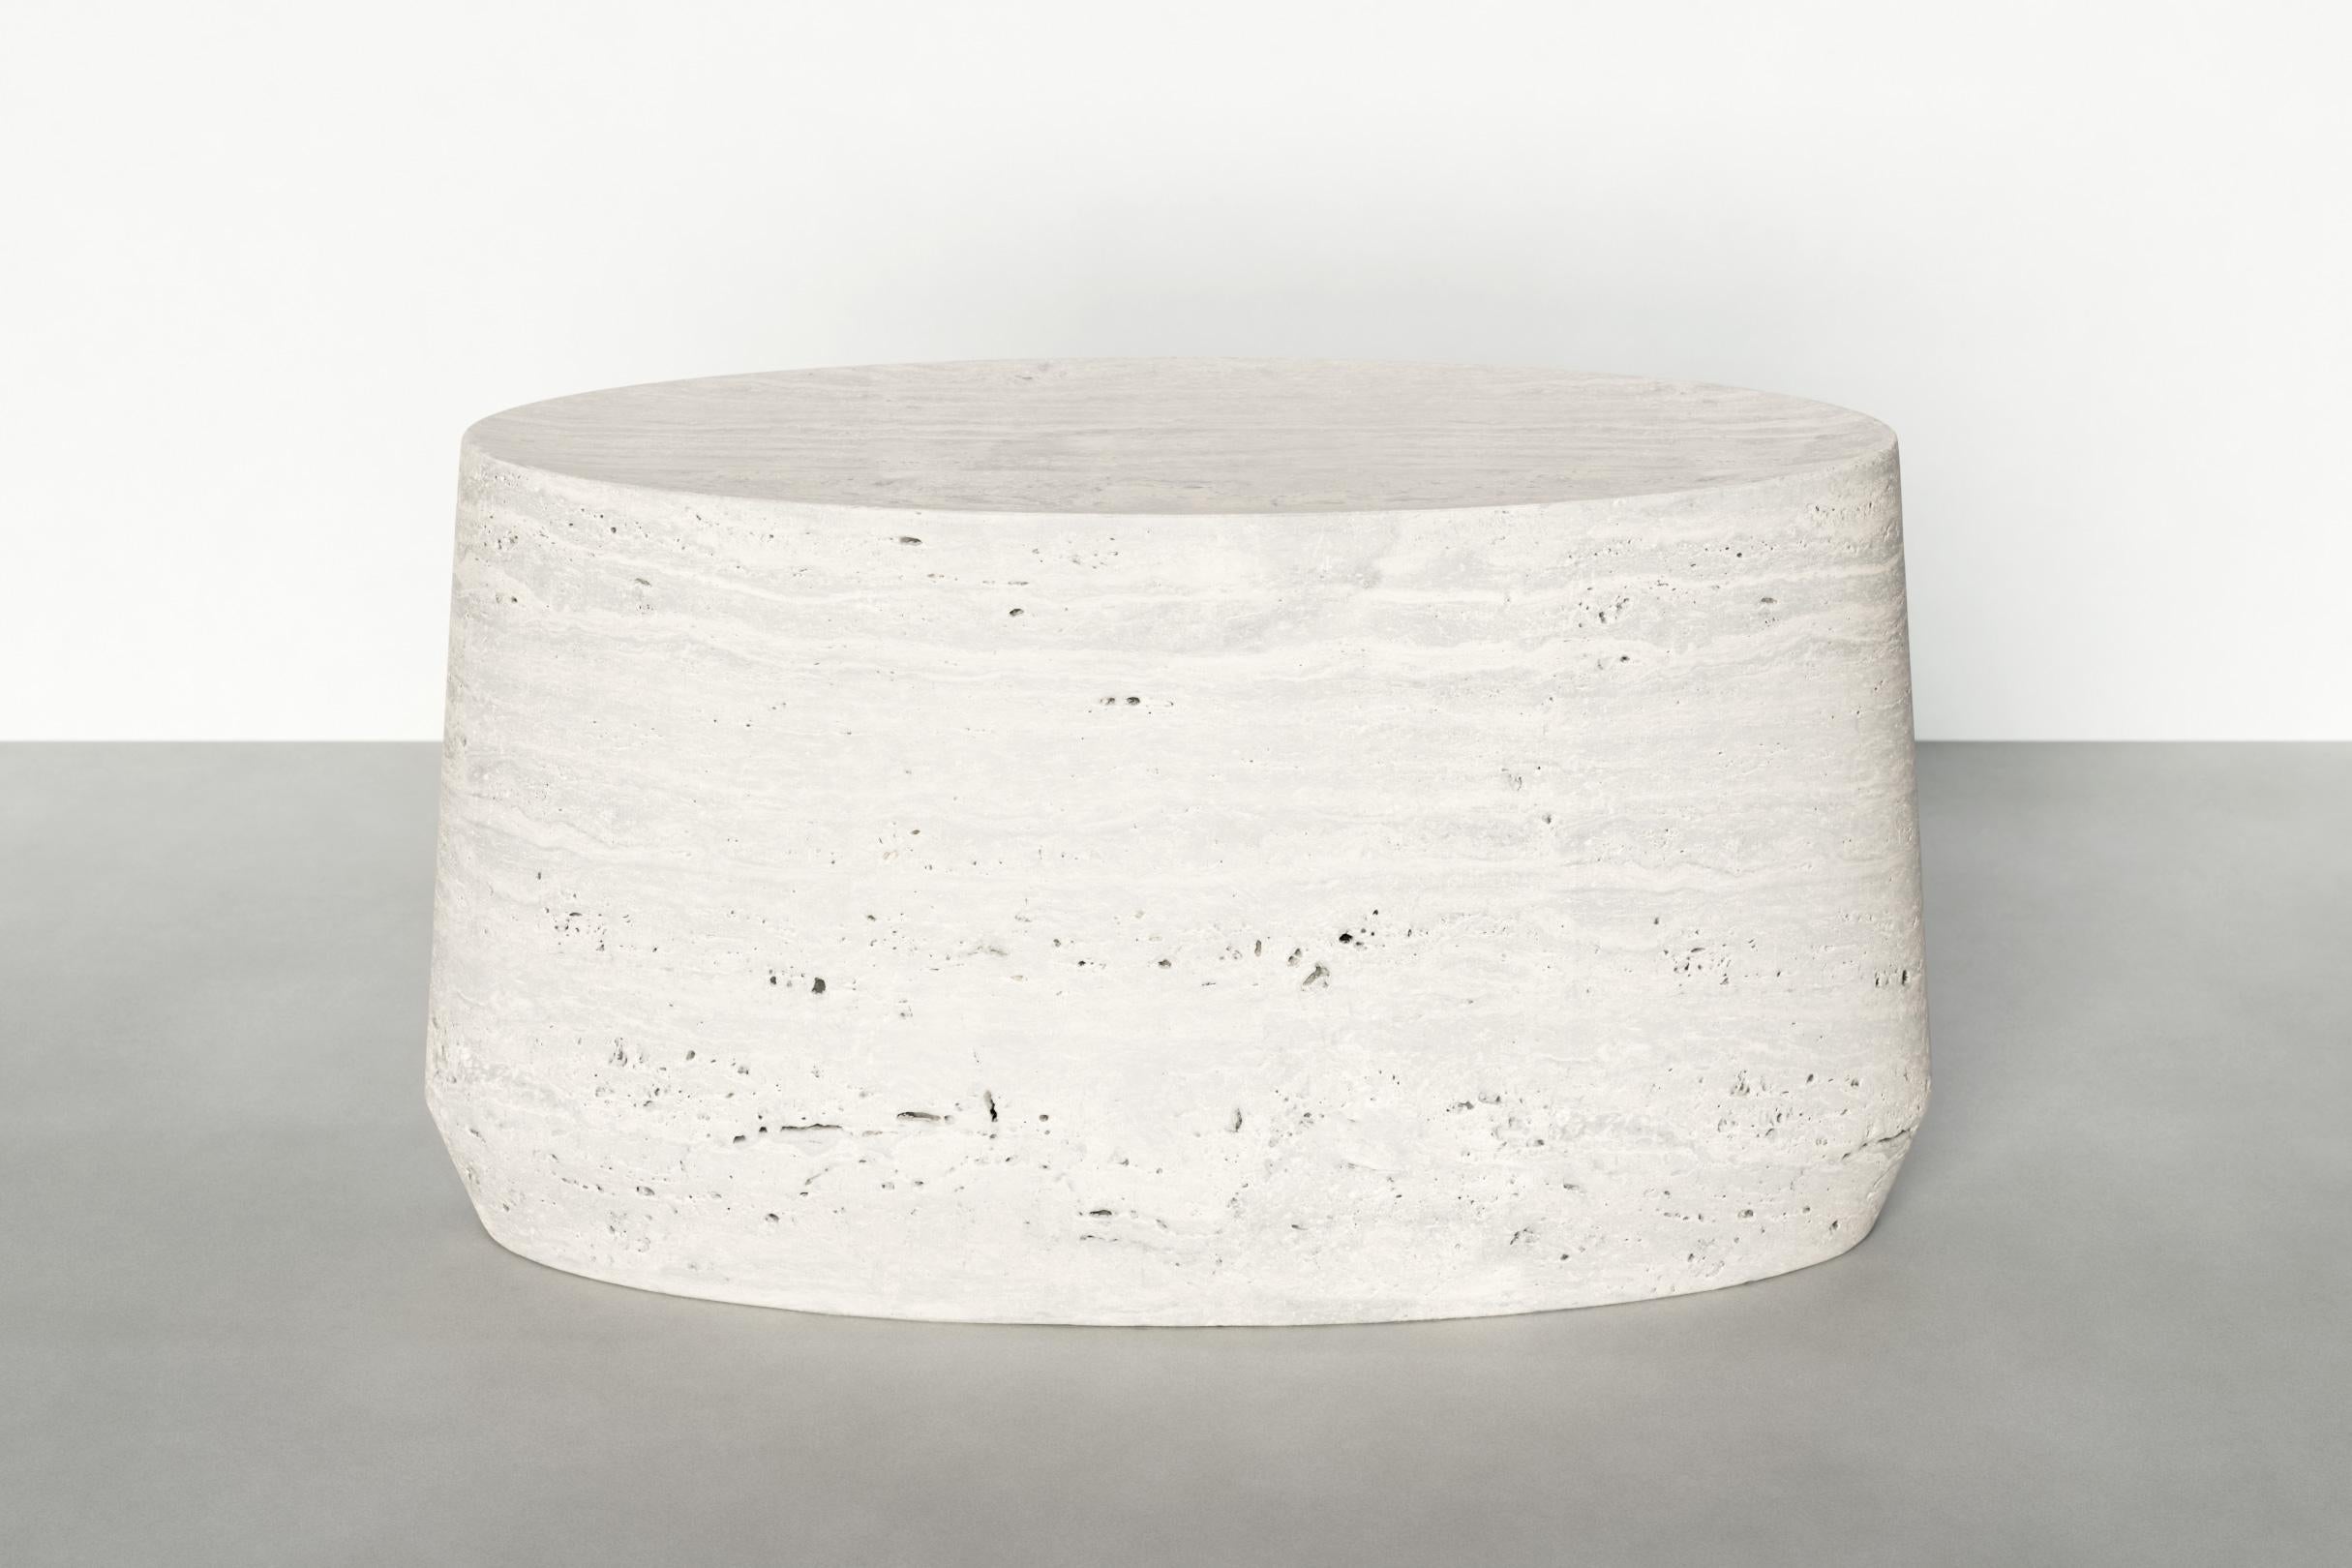 Timeless table V by Maria Osminina
Limited Edition of 12
Dimensions: 81 x 38 x 44 cm
Materials: Travertino Romano

Timeless is a series of pieces of stone furniture in which the aesthetic vector is aimed at a deep sense of time as being. It is in